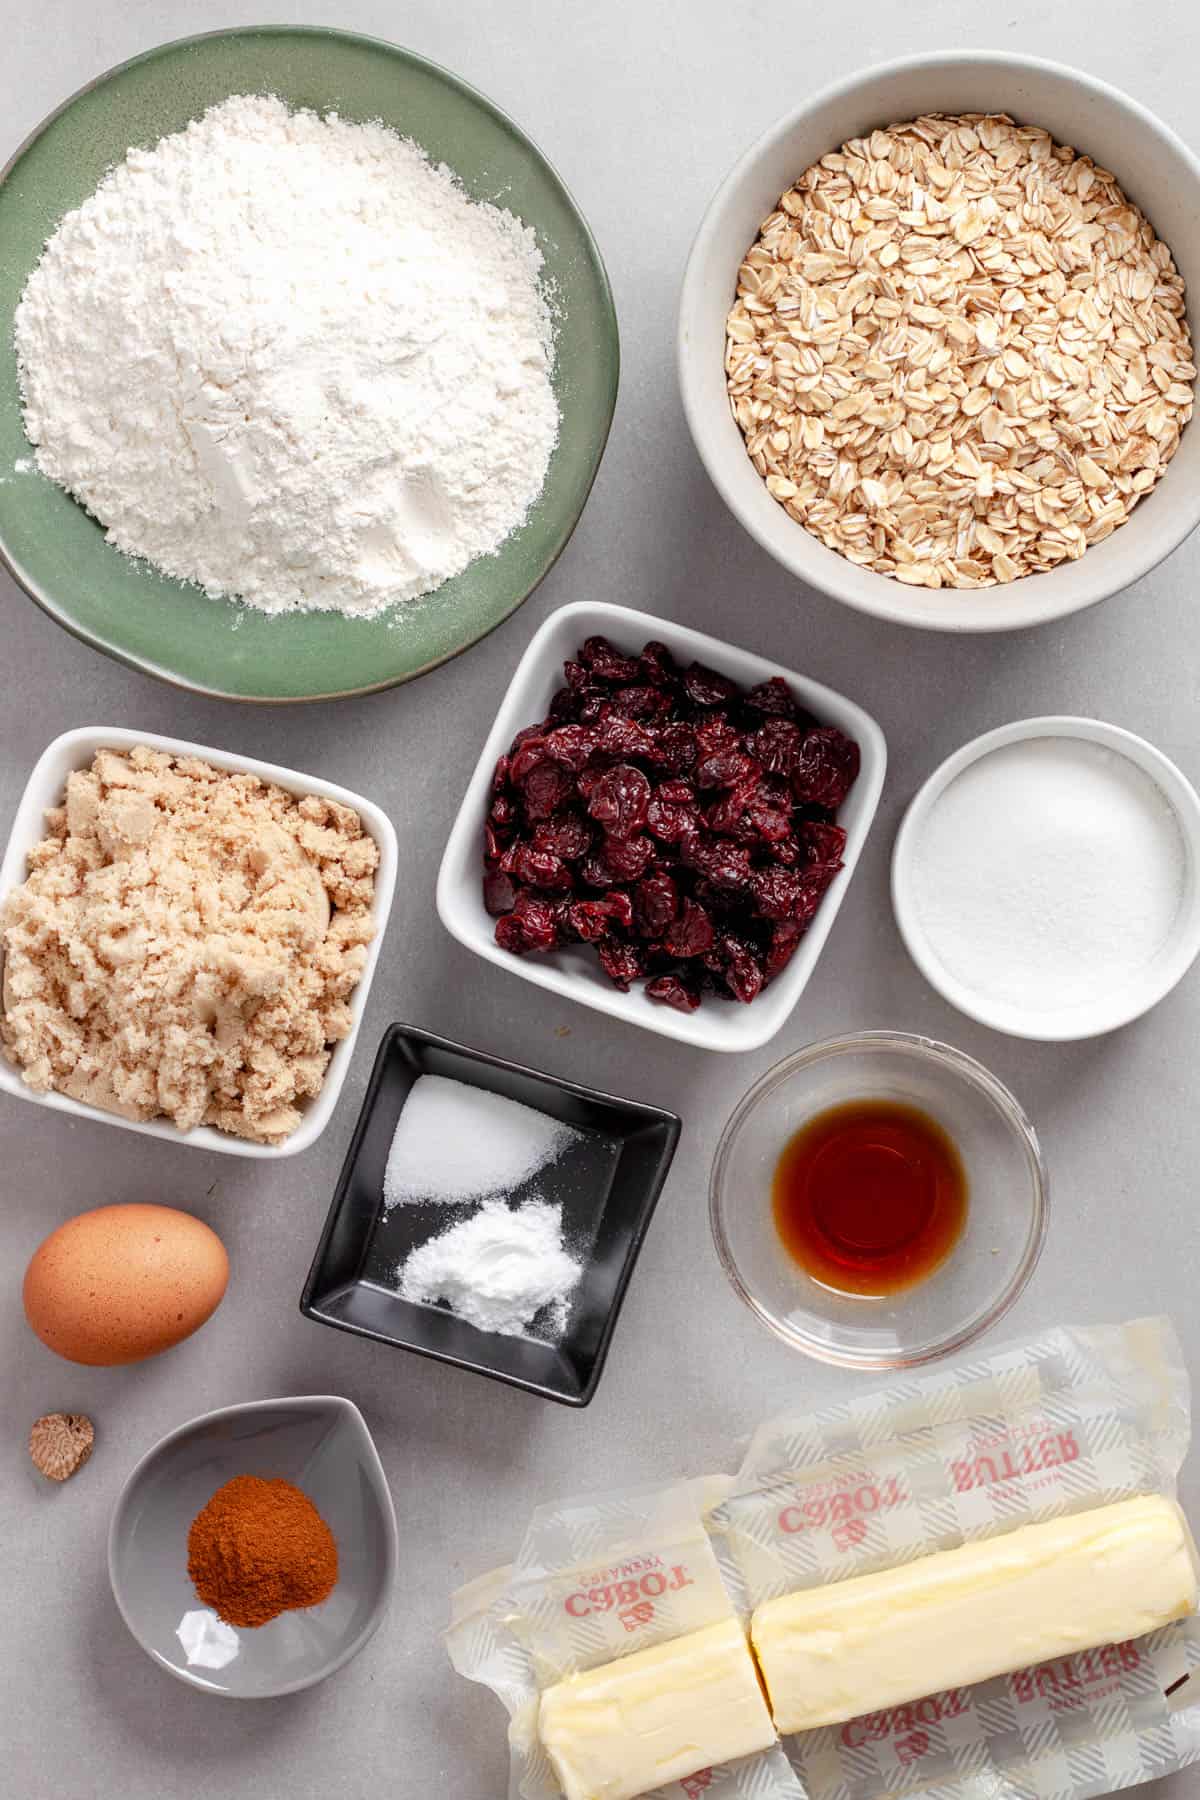 Ingredients for oatmeal cherry cookies on a gray table.